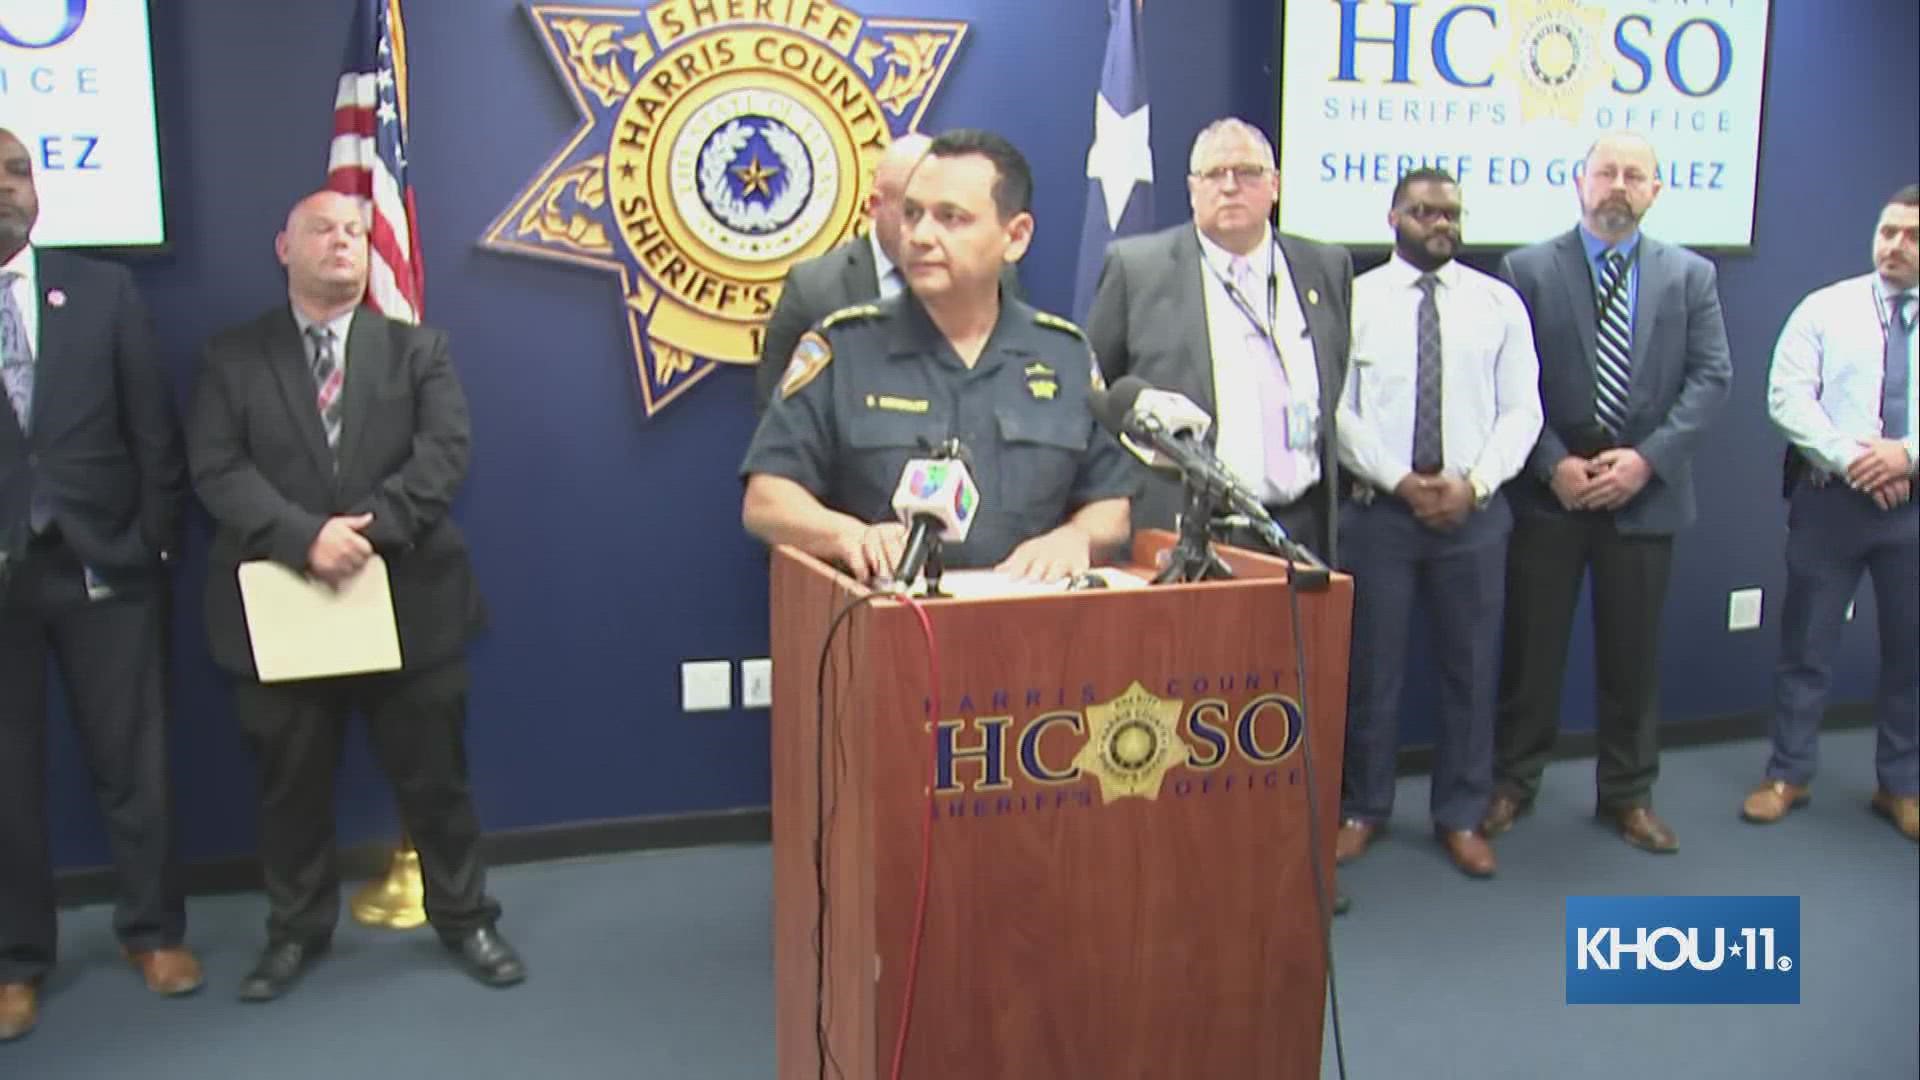 Harris County Sheriff Ed Gonzalez gave an update on the investigation into the murder of an 8-year-old  found with his siblings.